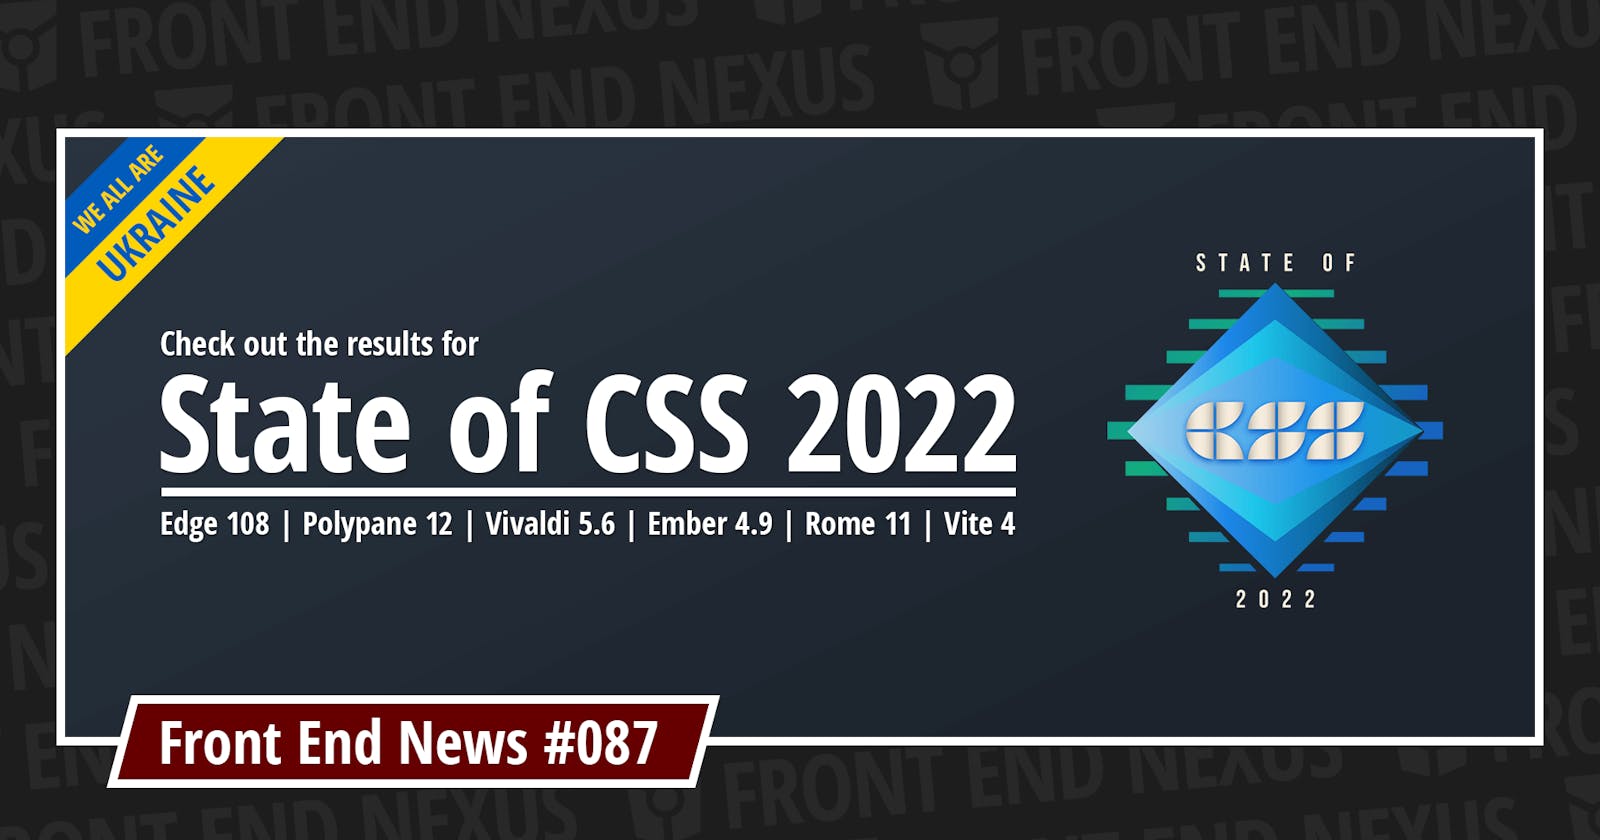 State of CSS 2022 Report, Edge 108, Polypane 12, Vivaldi 5.6, Ember 4.9, Rome 11, Vite 4, and more | Front End News #087